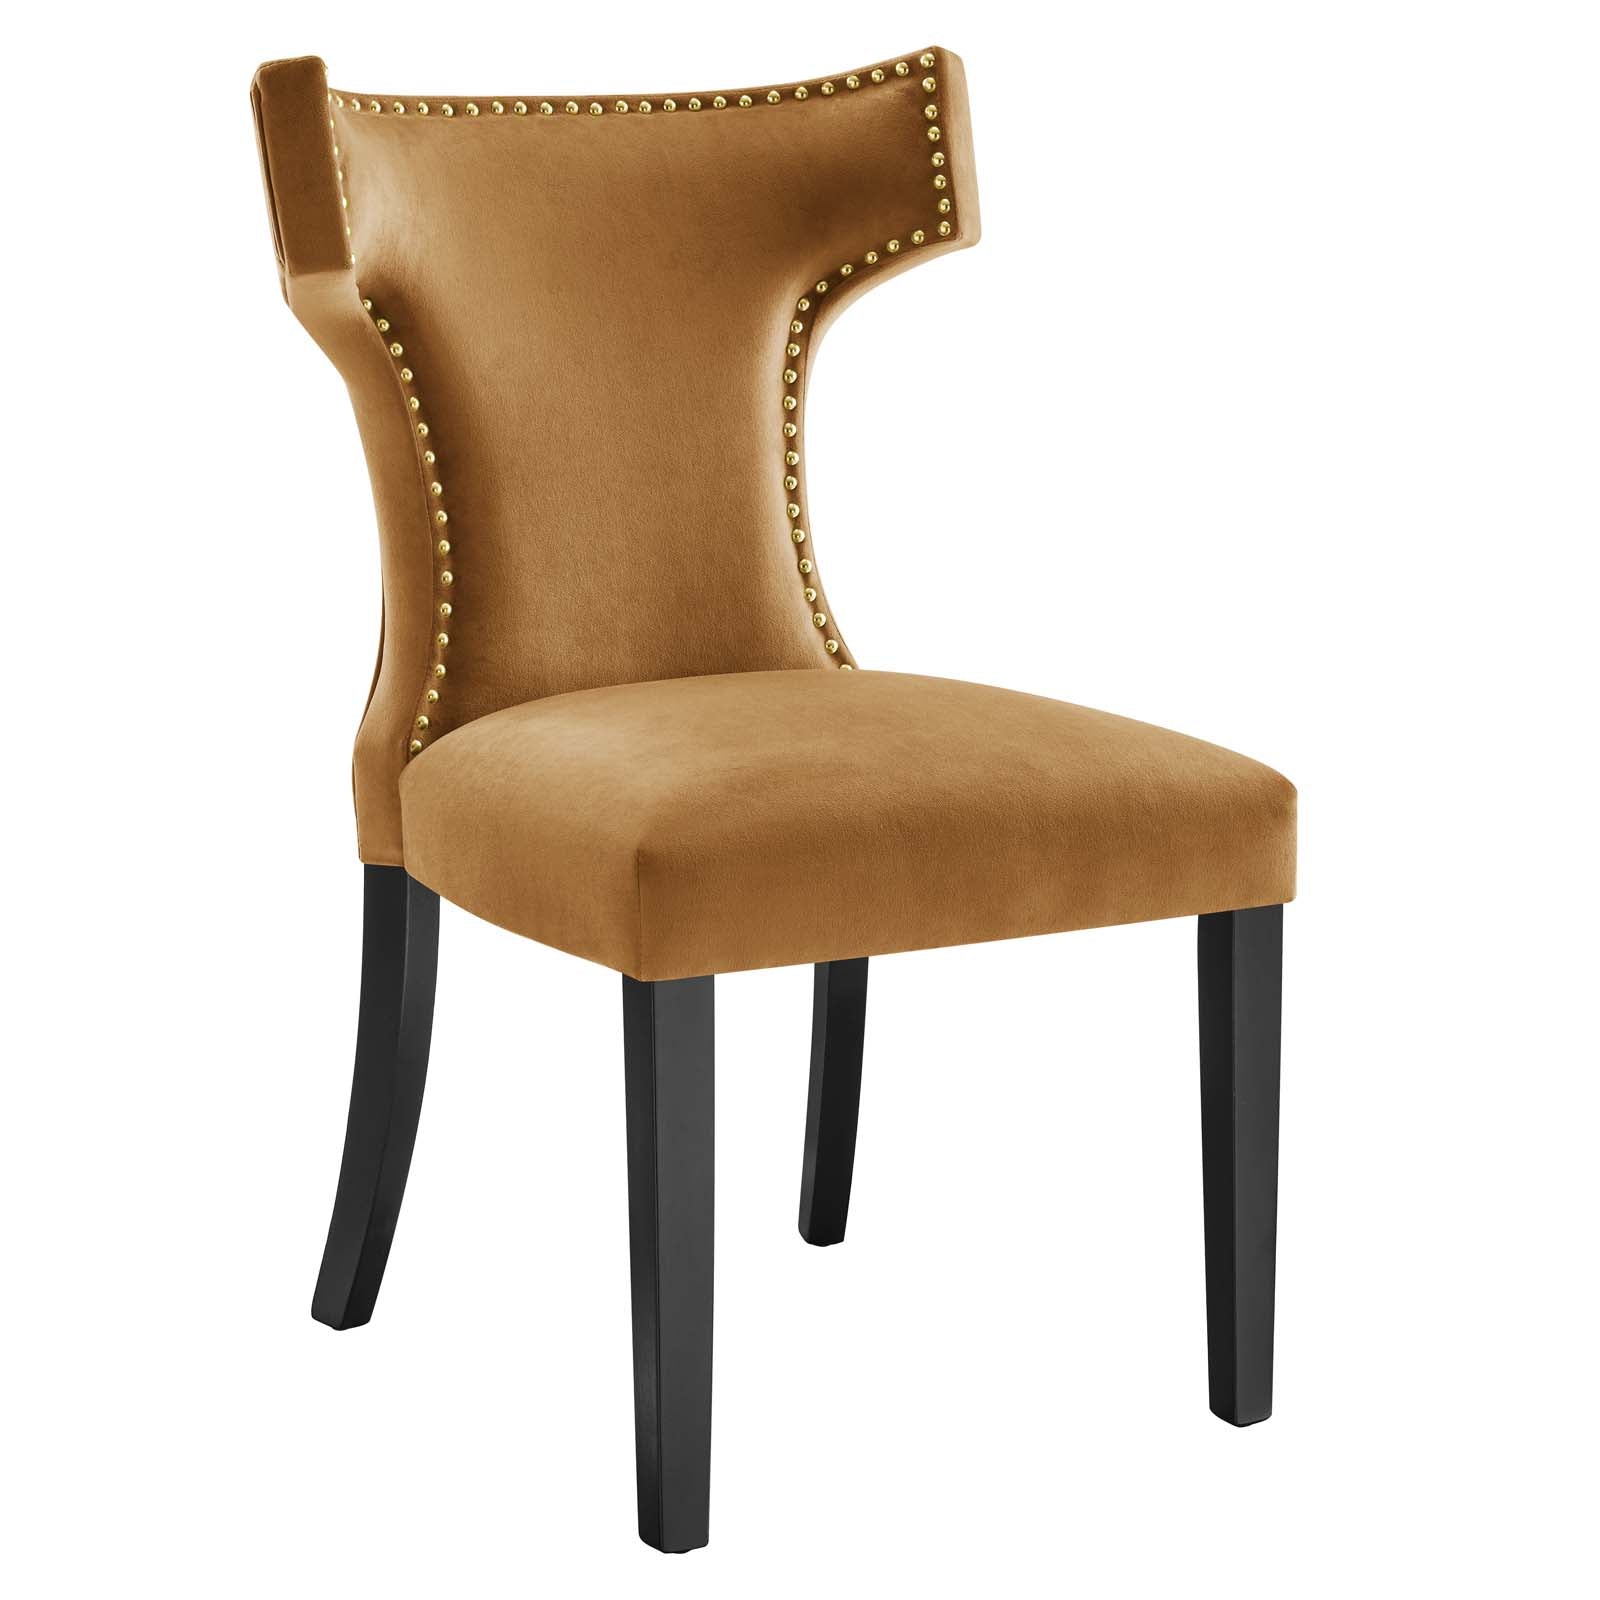 Modway Dining Chairs - Curve Performance Velvet Dining Chairs - Set of 2 Cognac